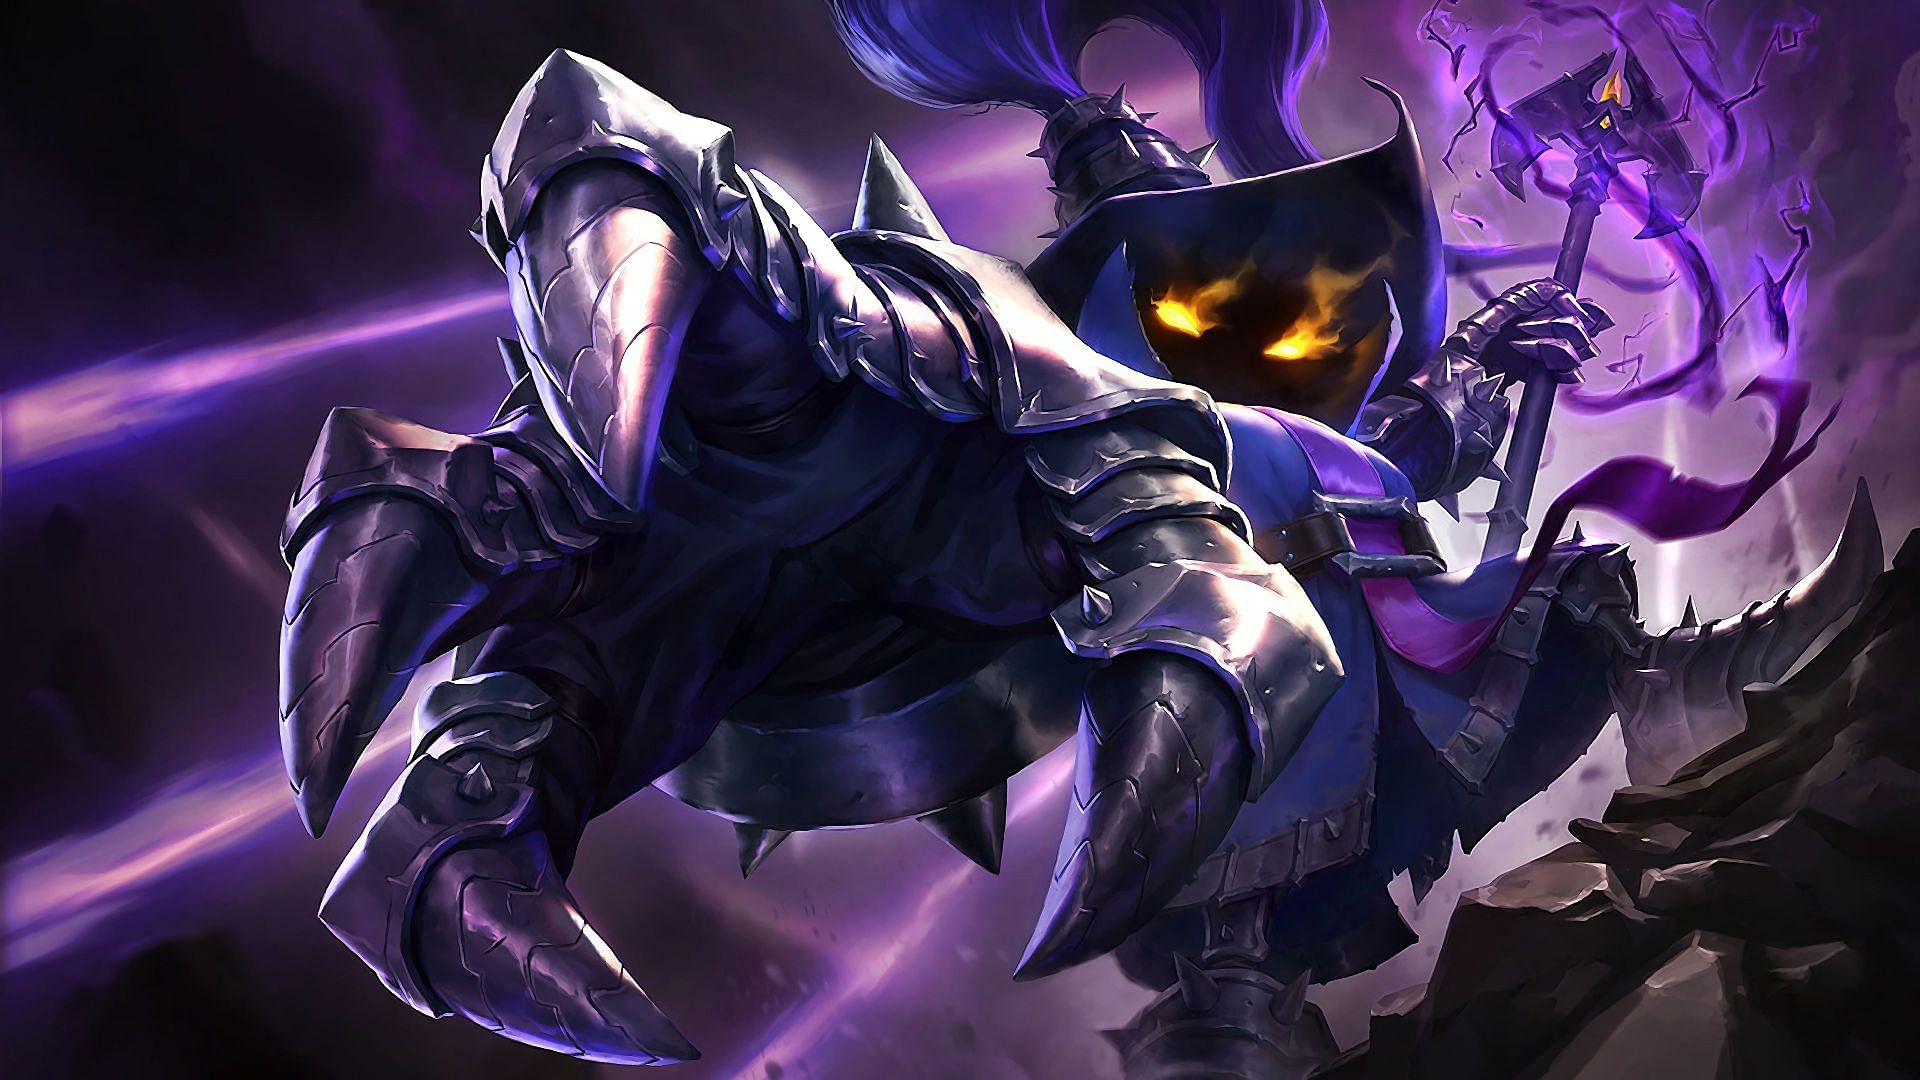 Veigar can zone out Lucian using his cage ability (Image via League of Legends)